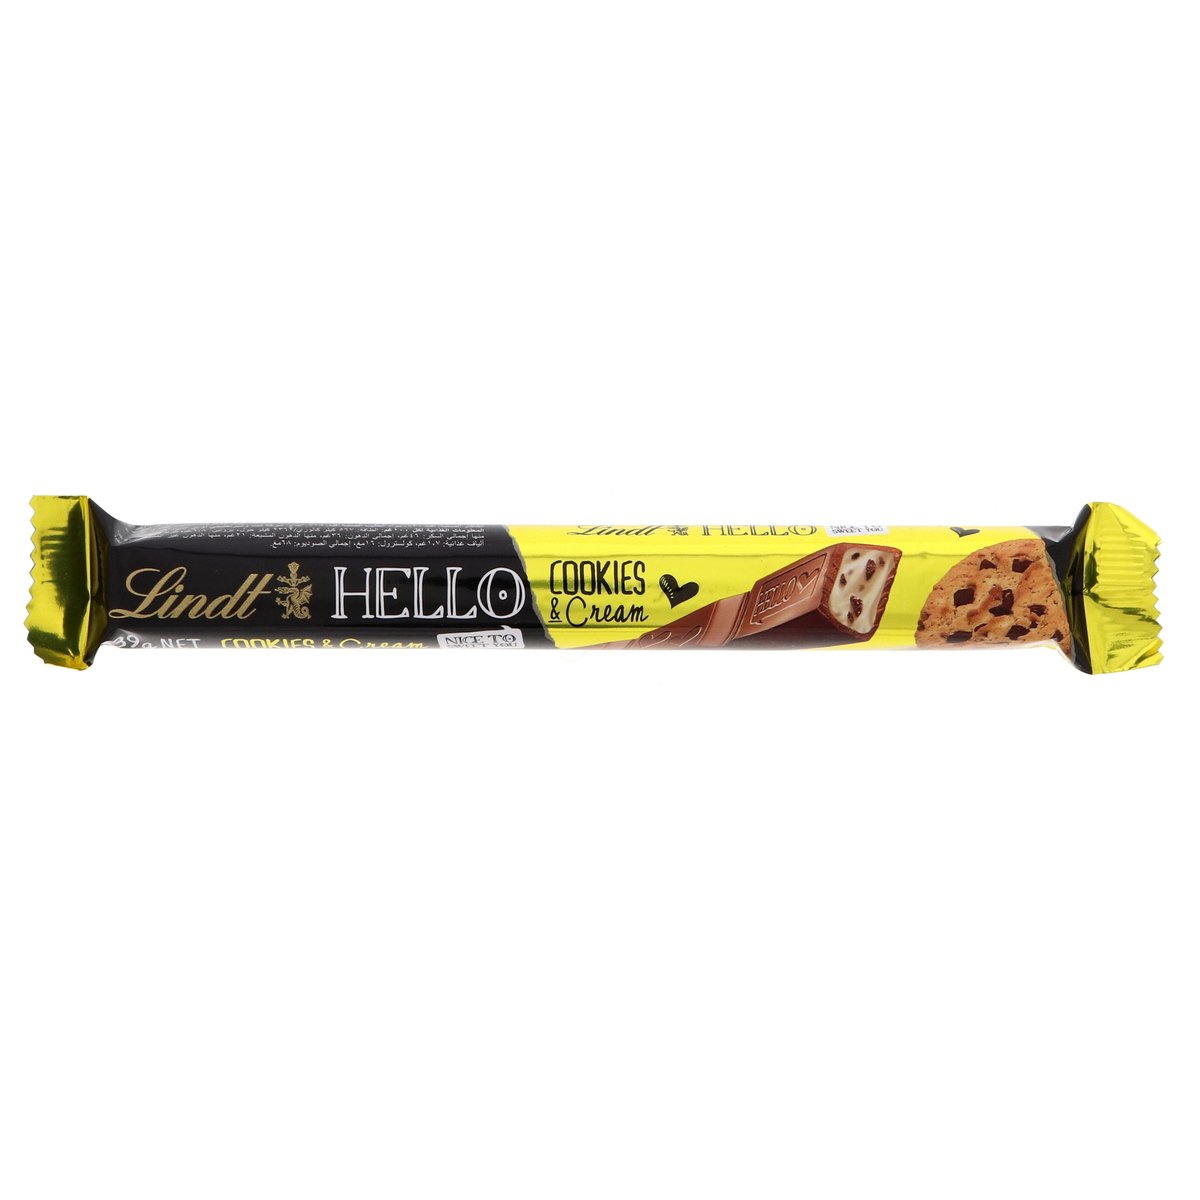 Lindt Hello Cookies And Cream 39g